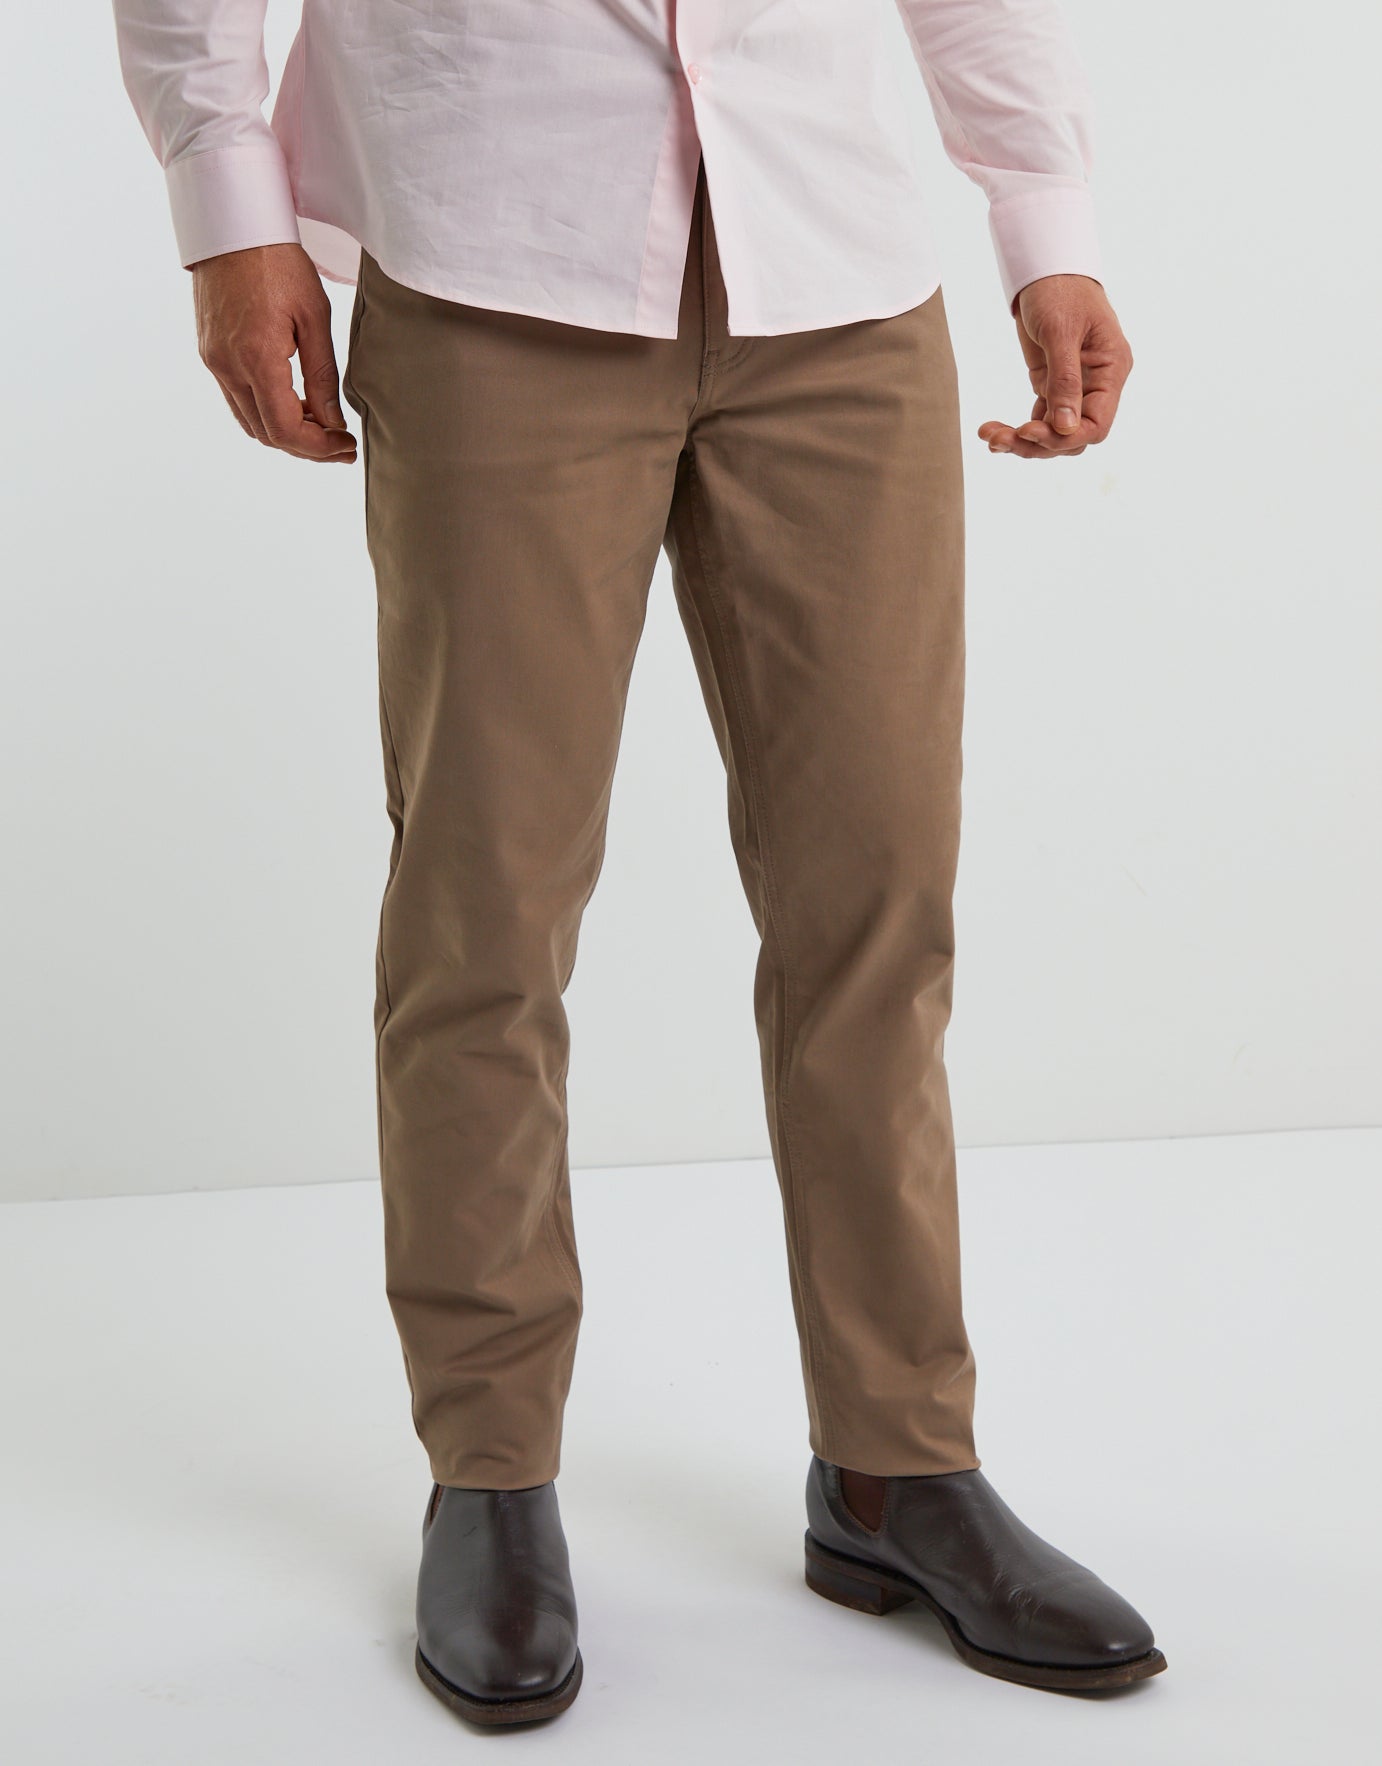 What are the origins of chino pants? - Quora